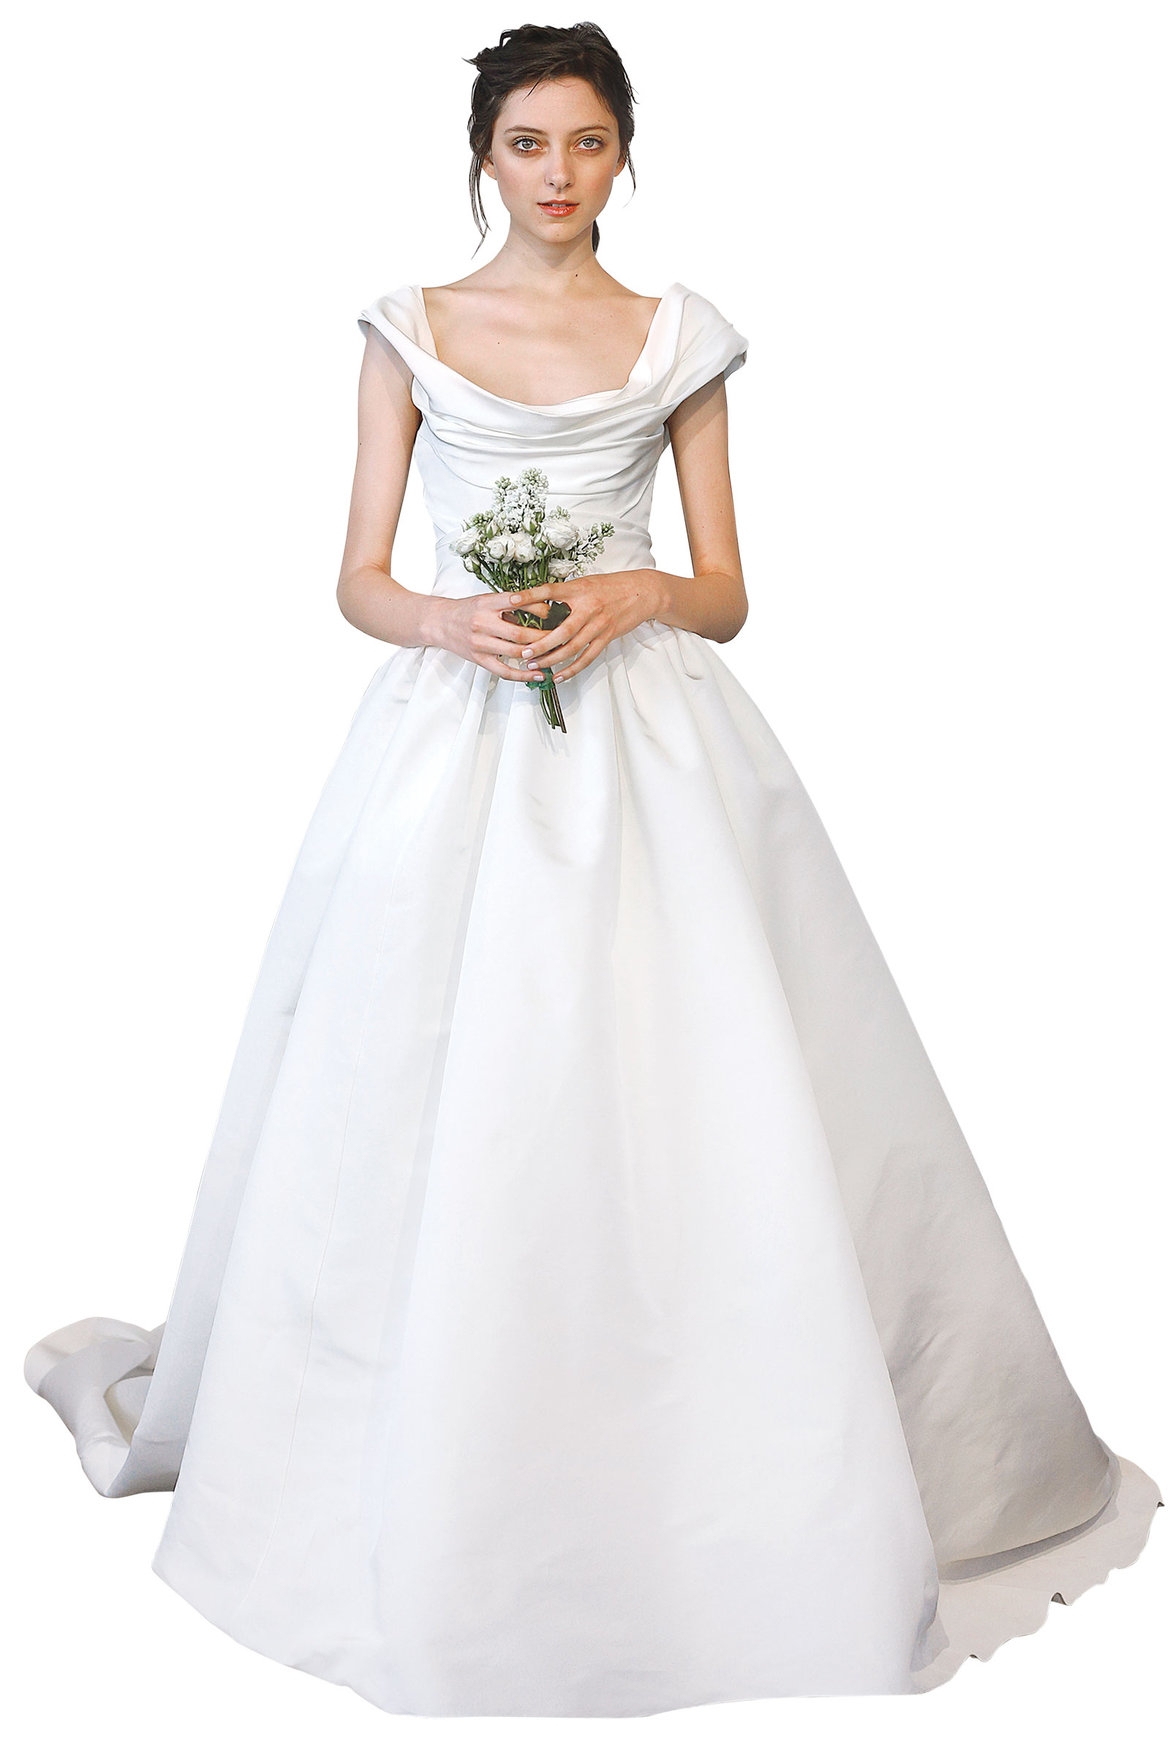 Best Wedding  Dress  for Your Body  Type  Page 2 BridalGuide